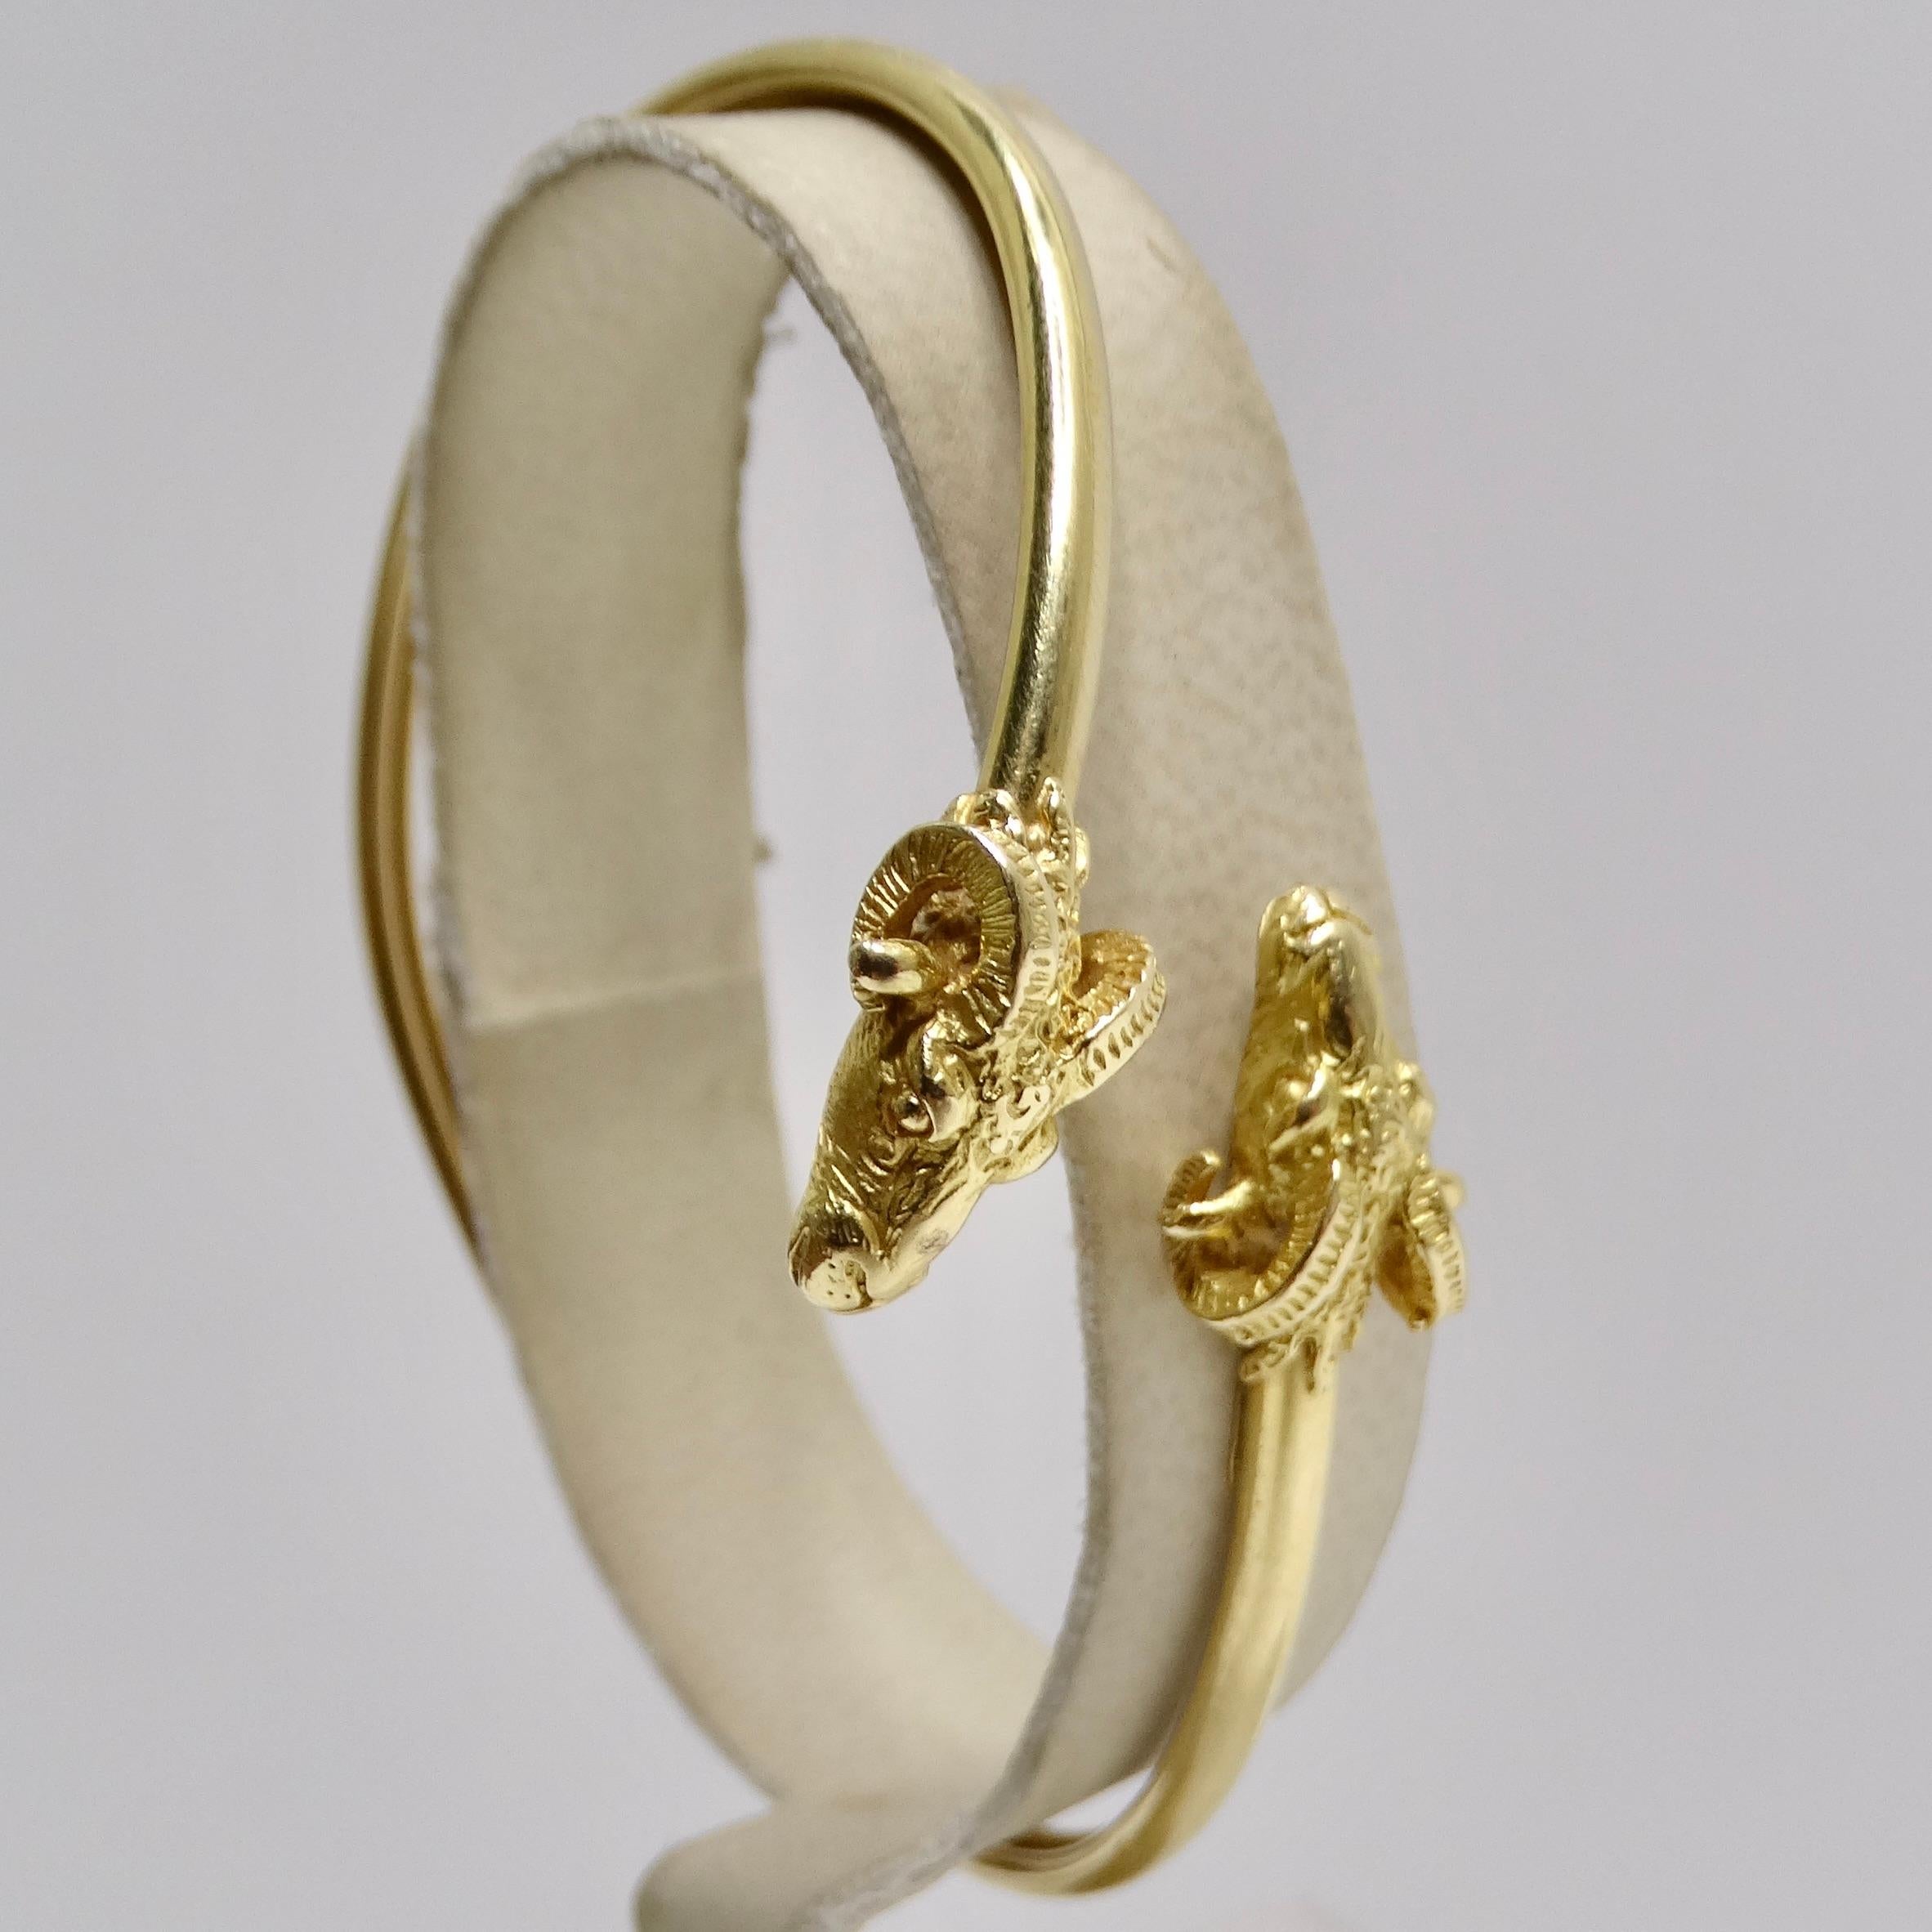 18K Solid Gold 1960s Ram Head Cuff Bracelet In Excellent Condition For Sale In Scottsdale, AZ